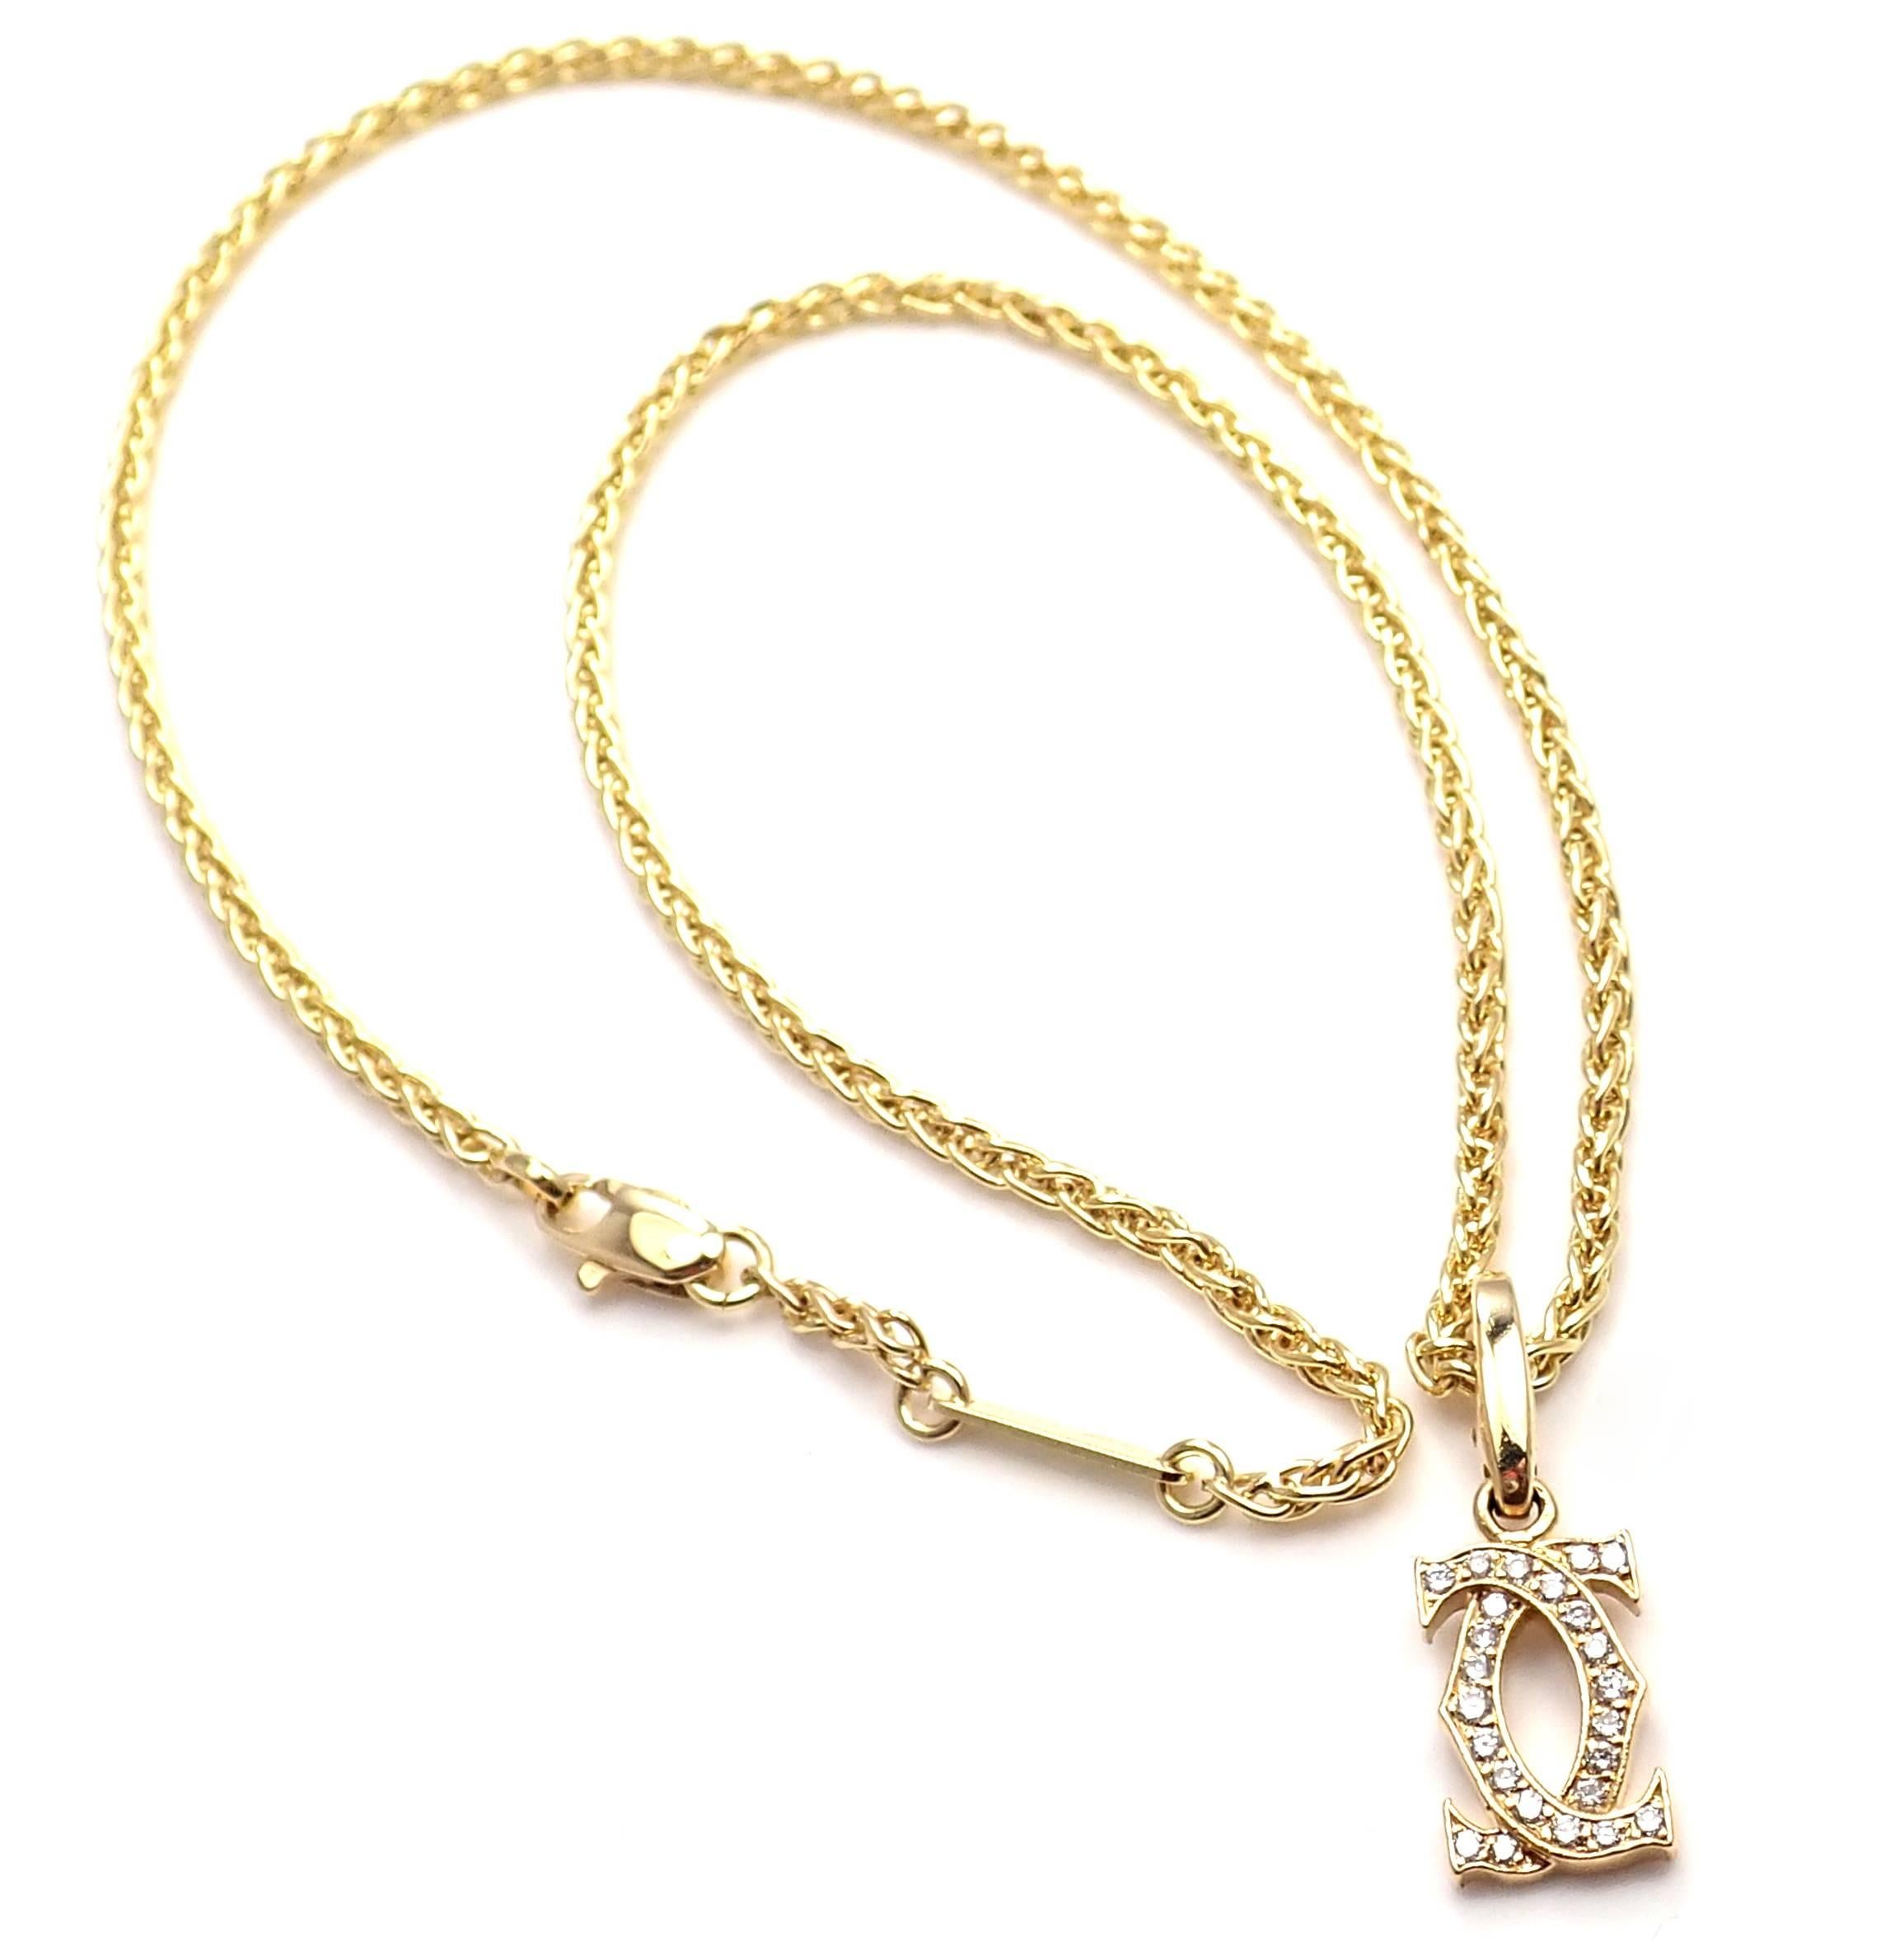 18k Yellow Gold Diamond Double C  Pendant Chain Necklace by Cartier. 
With 24 round brilliant cut diamonds VVS1 clarity, E color total weight approx. 0.25ctw
Details: 
Chain: Length 16.5